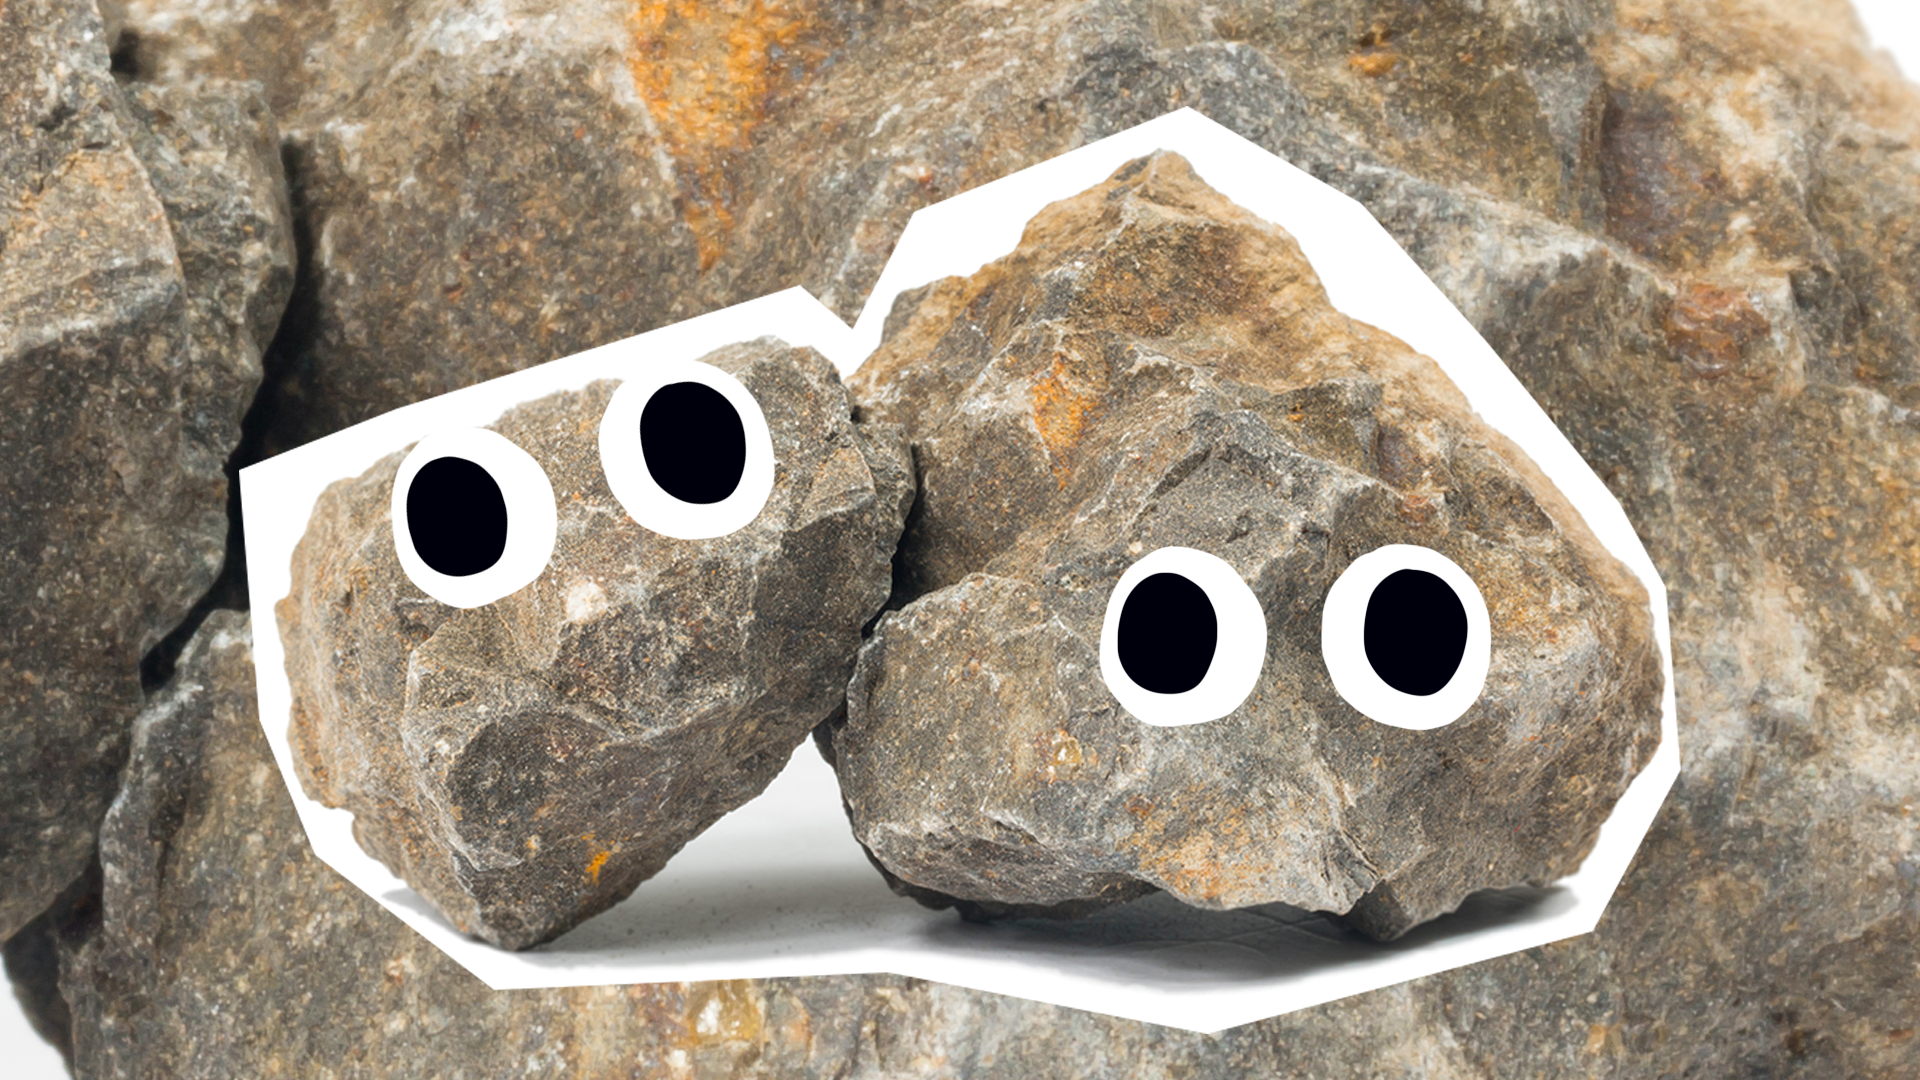 Two goofy rocks with eyes